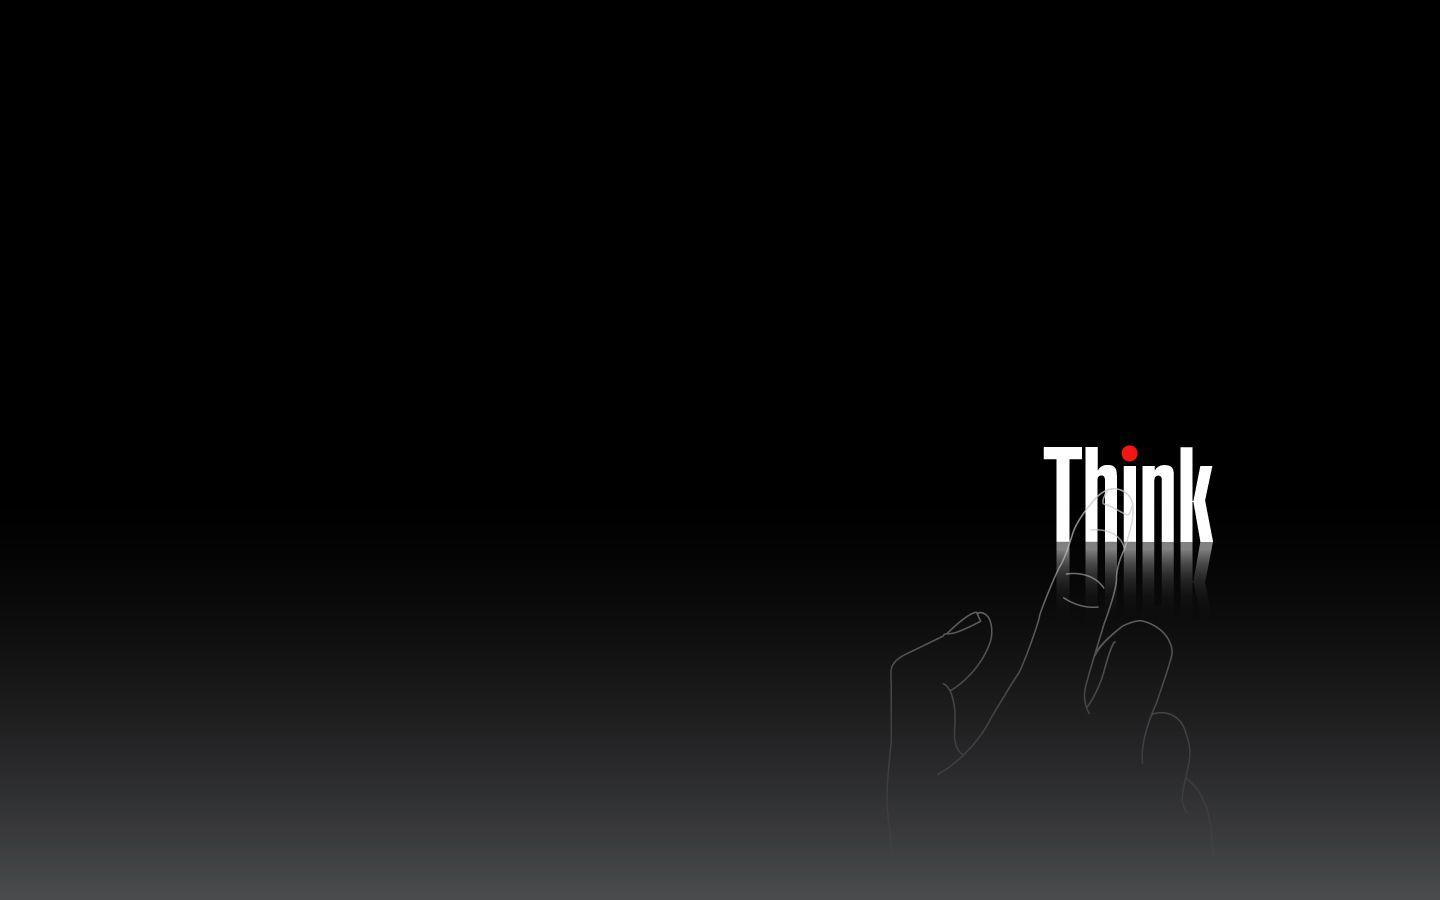 Lenovo Thinkbook Wallpapers Top Free Lenovo Thinkbook Backgrounds Wallpaperaccess